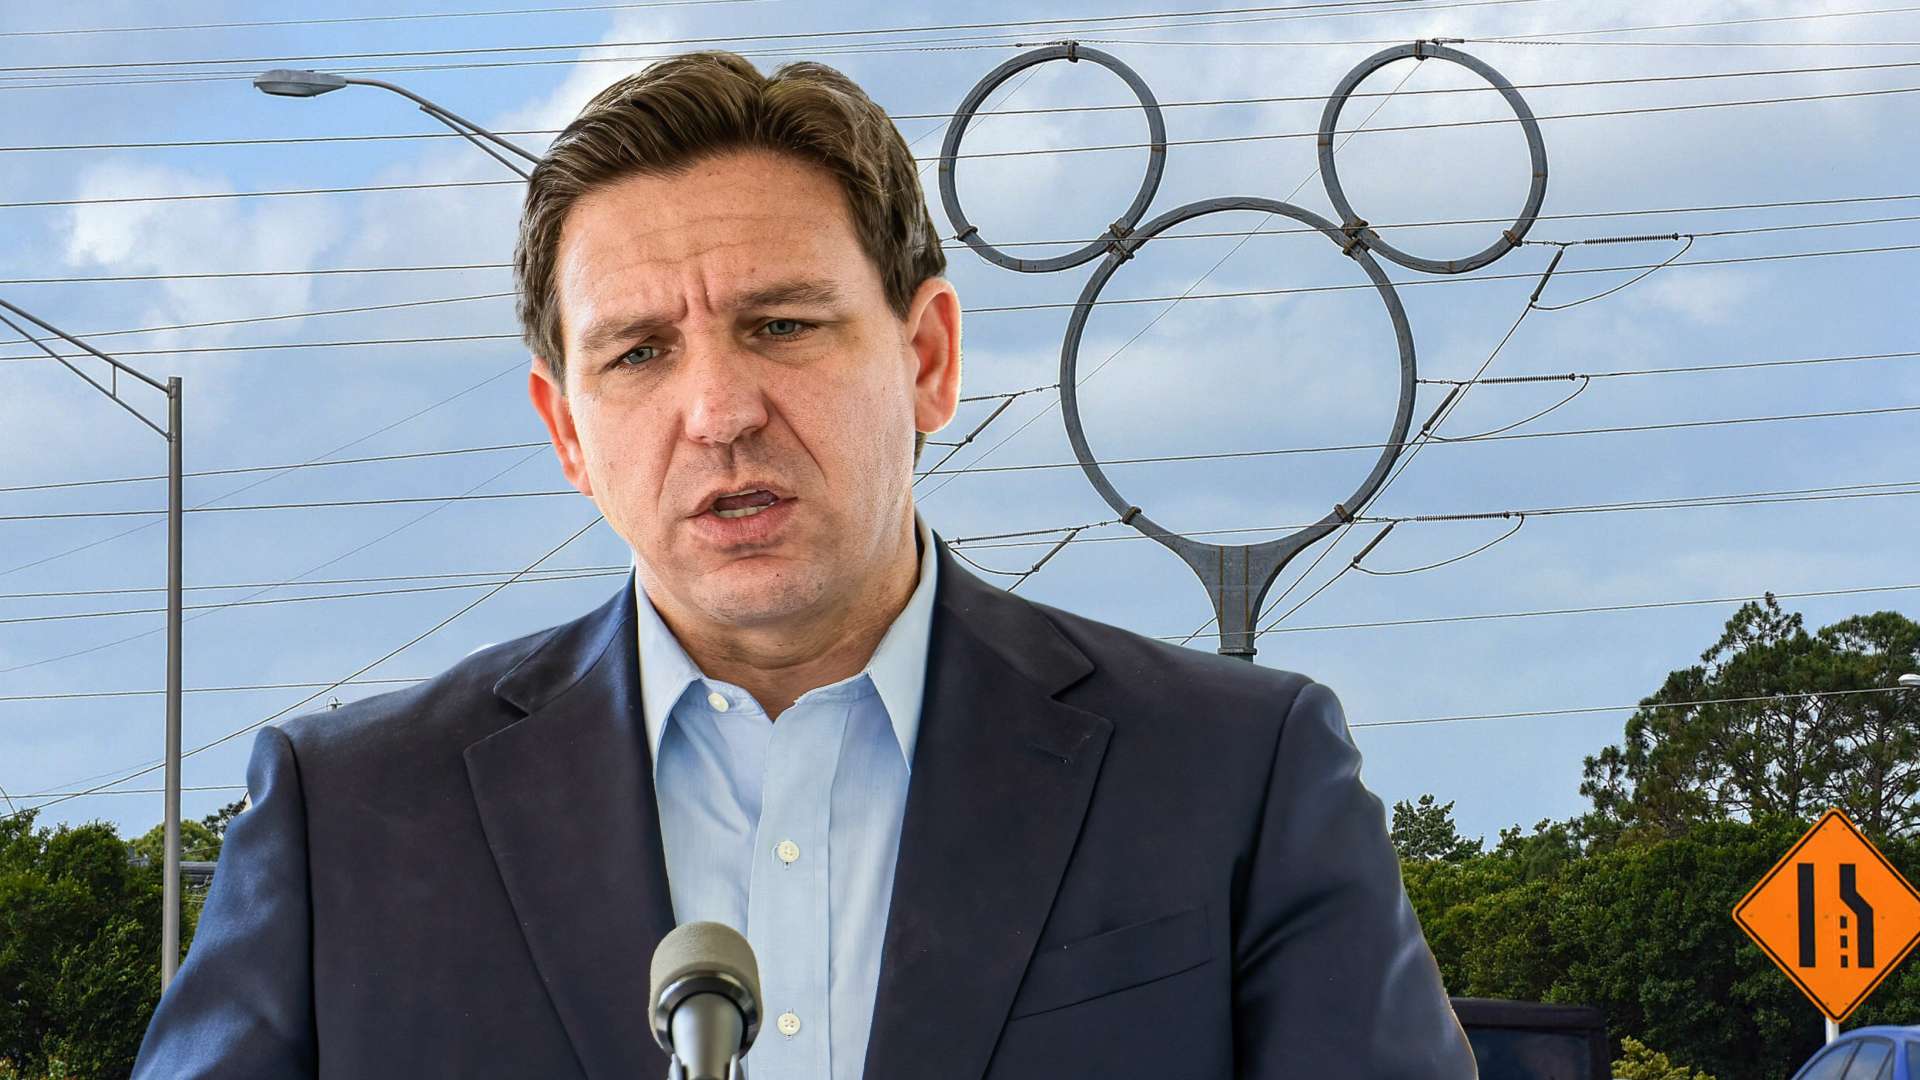 Is Florida giving up its fight against 'woke' Disney?